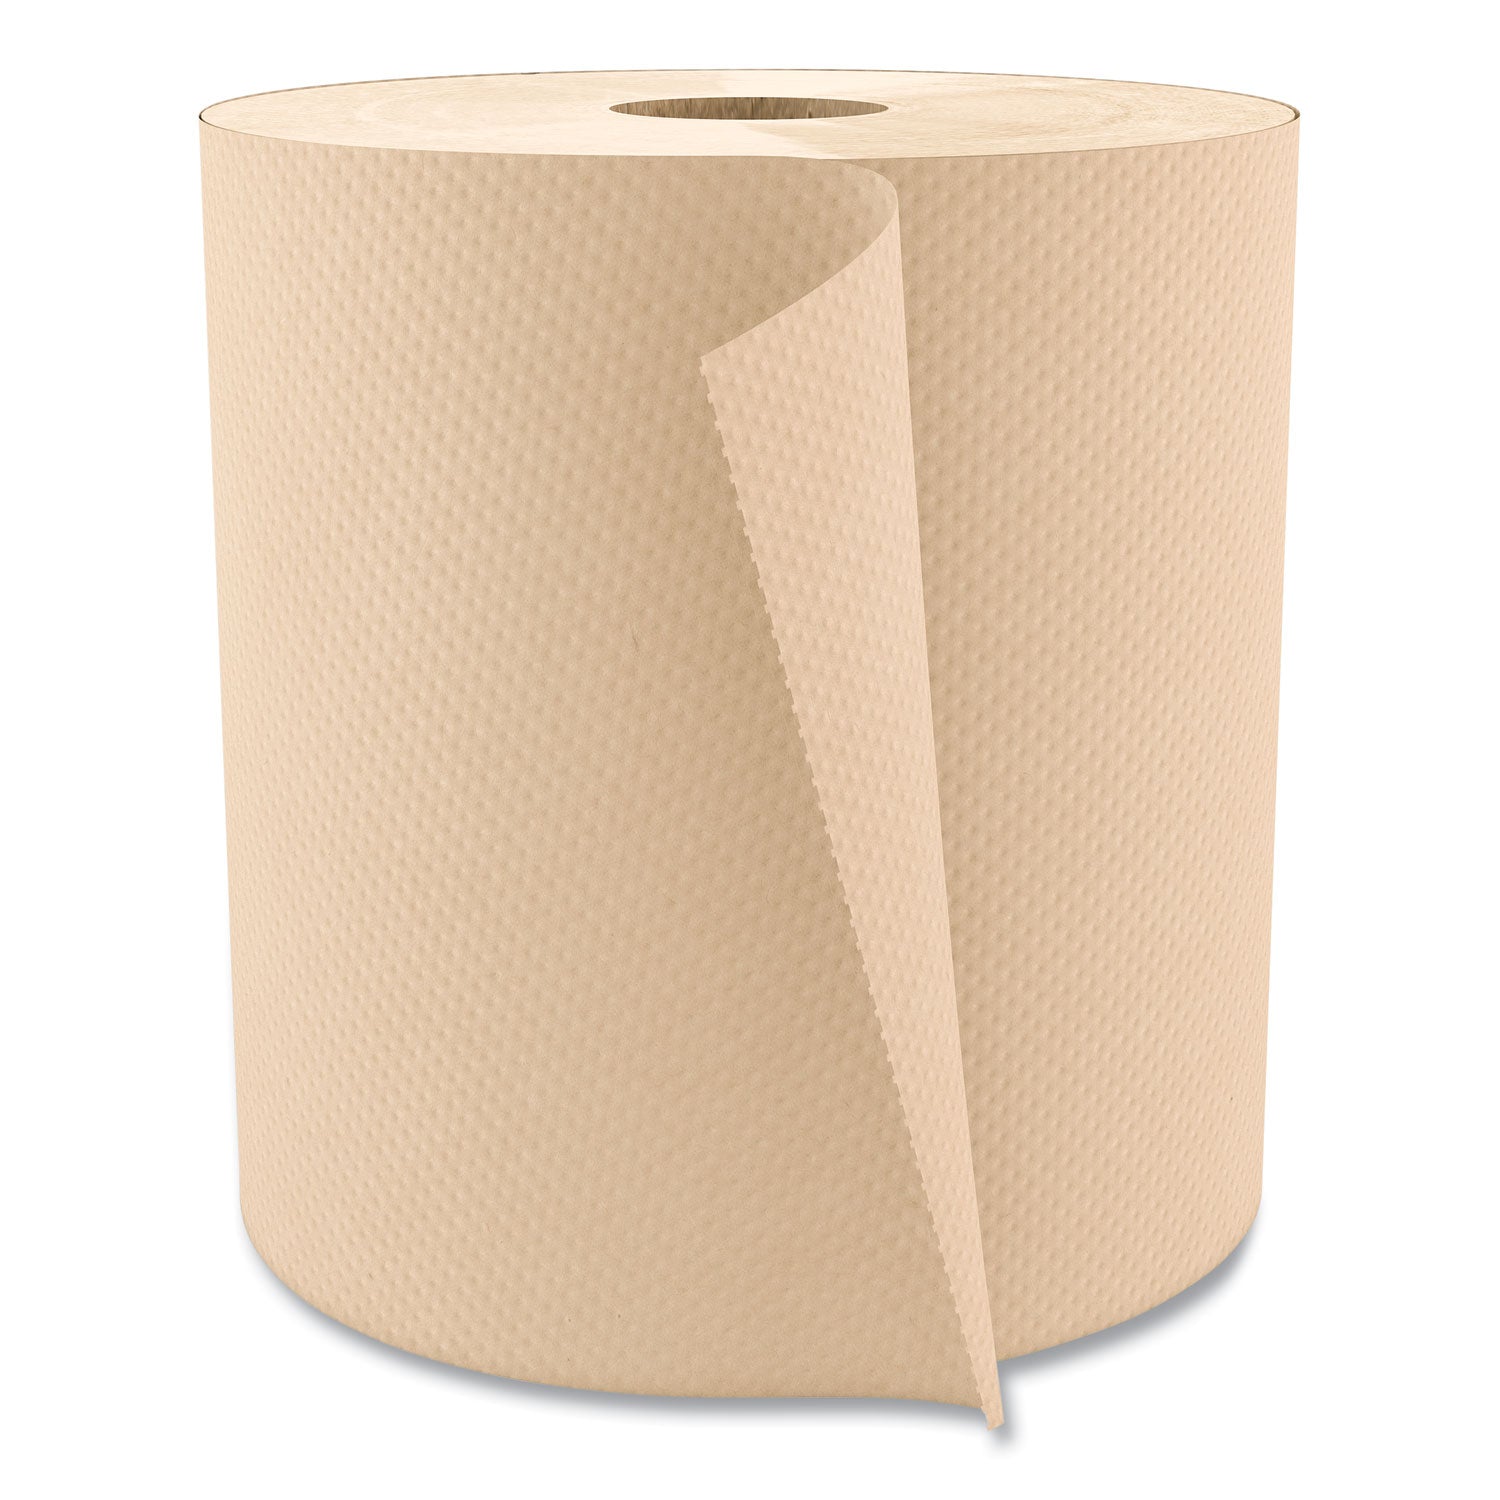 Hardwound Paper Towels, Nonperforated, 1-Ply, 8" x 800 ft, Natural, 6 Rolls/Carton - 